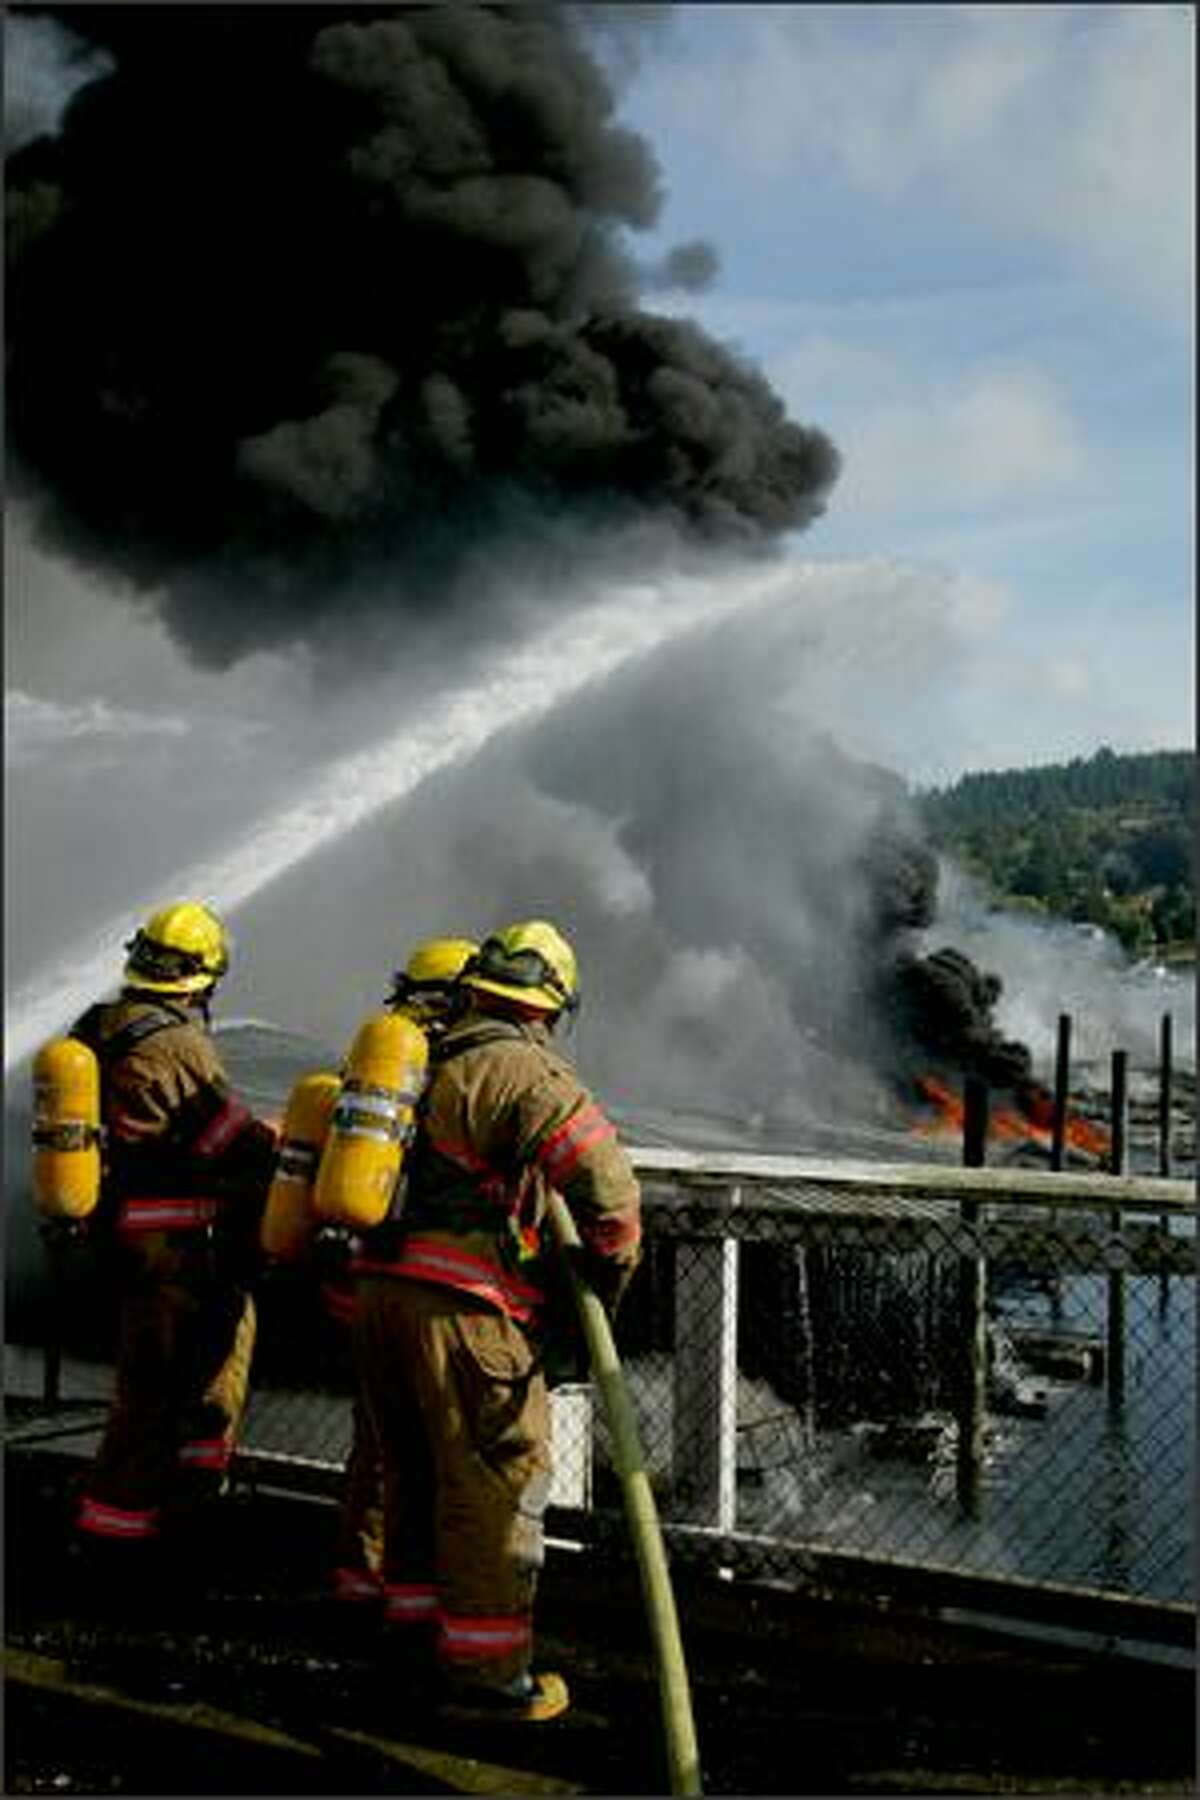 Firefighters fight a fast-moving fire at the Harborview Marina in downtown Gig Harbor.